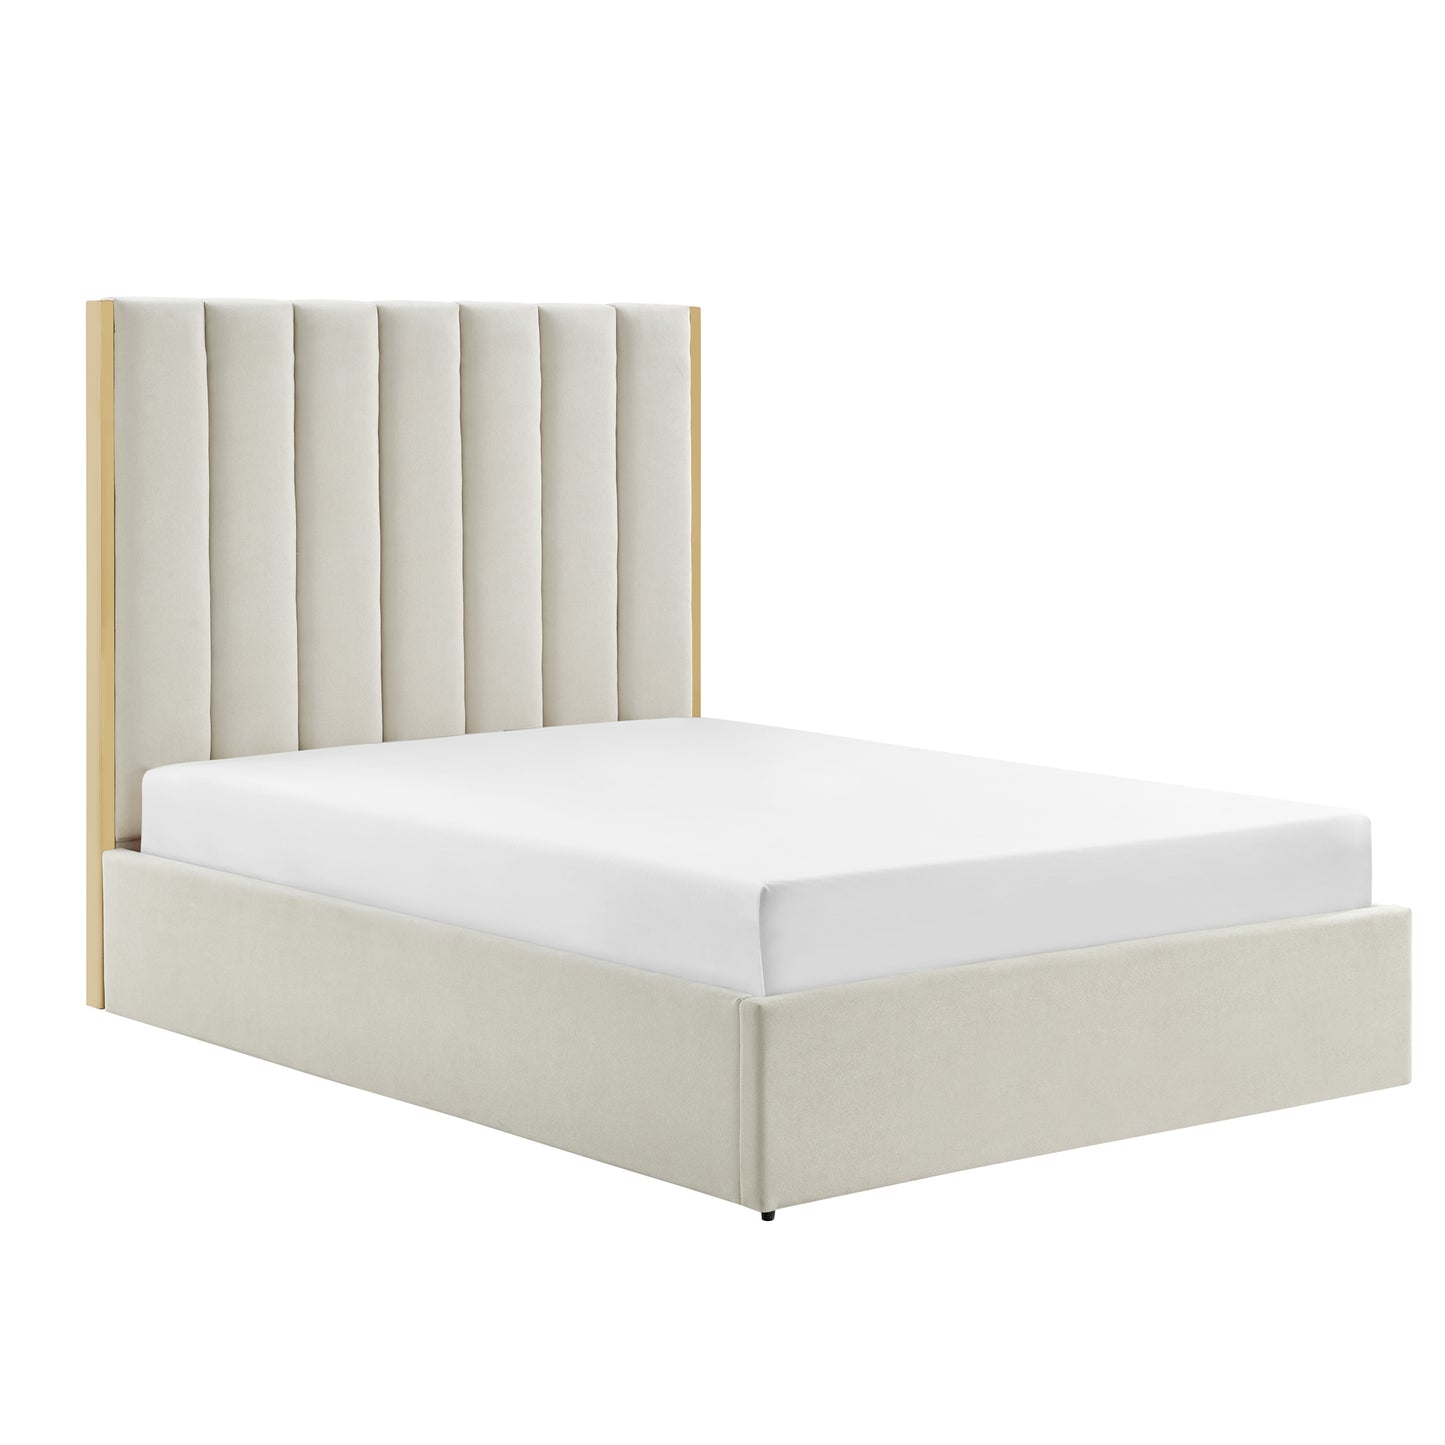 Chloe Neutral Beige Bed With Gold Trim And Ottoman Storage